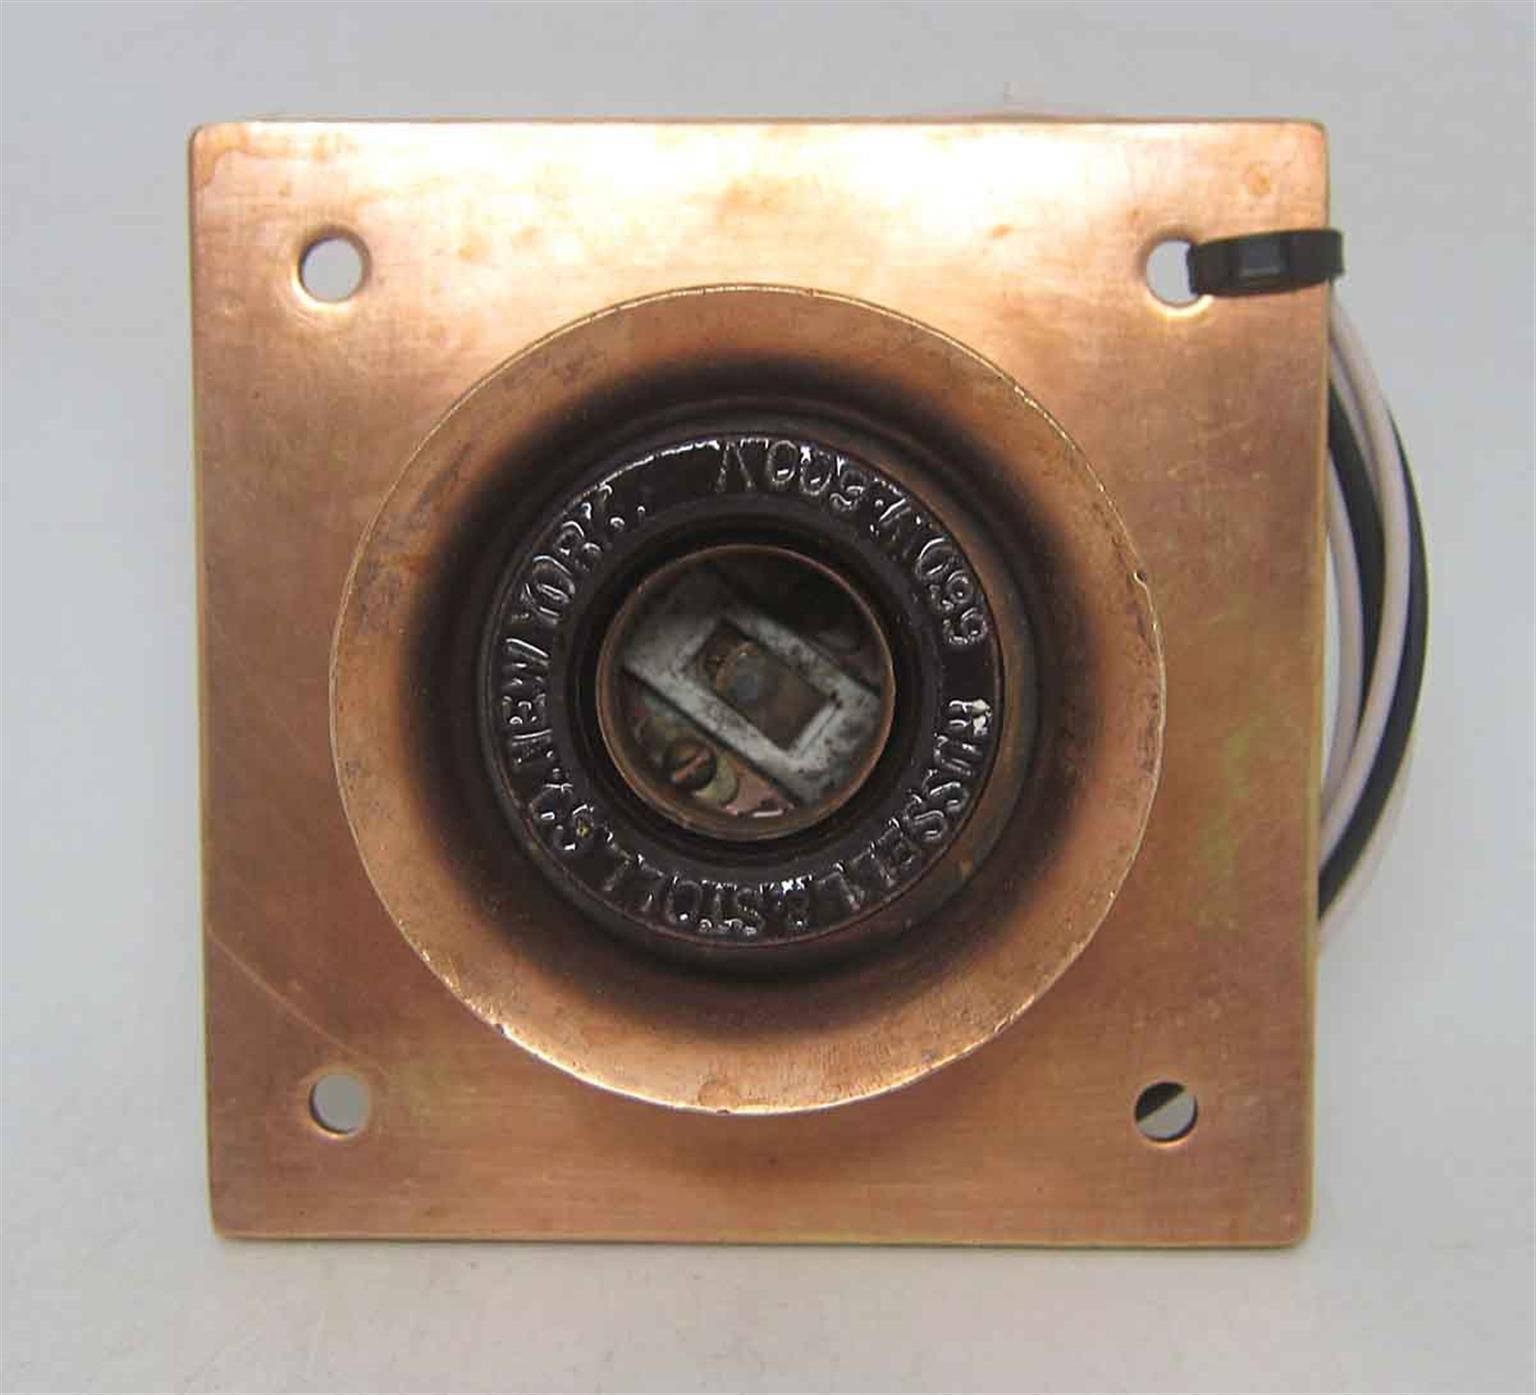 Original 1920s New York City copper plated brass single subway flush mount light. Made by Russell & Stoll Co., New York. Mounts in standard electrical junction box. Some copper plated, some more brassy in appearance. Small quantity available at time